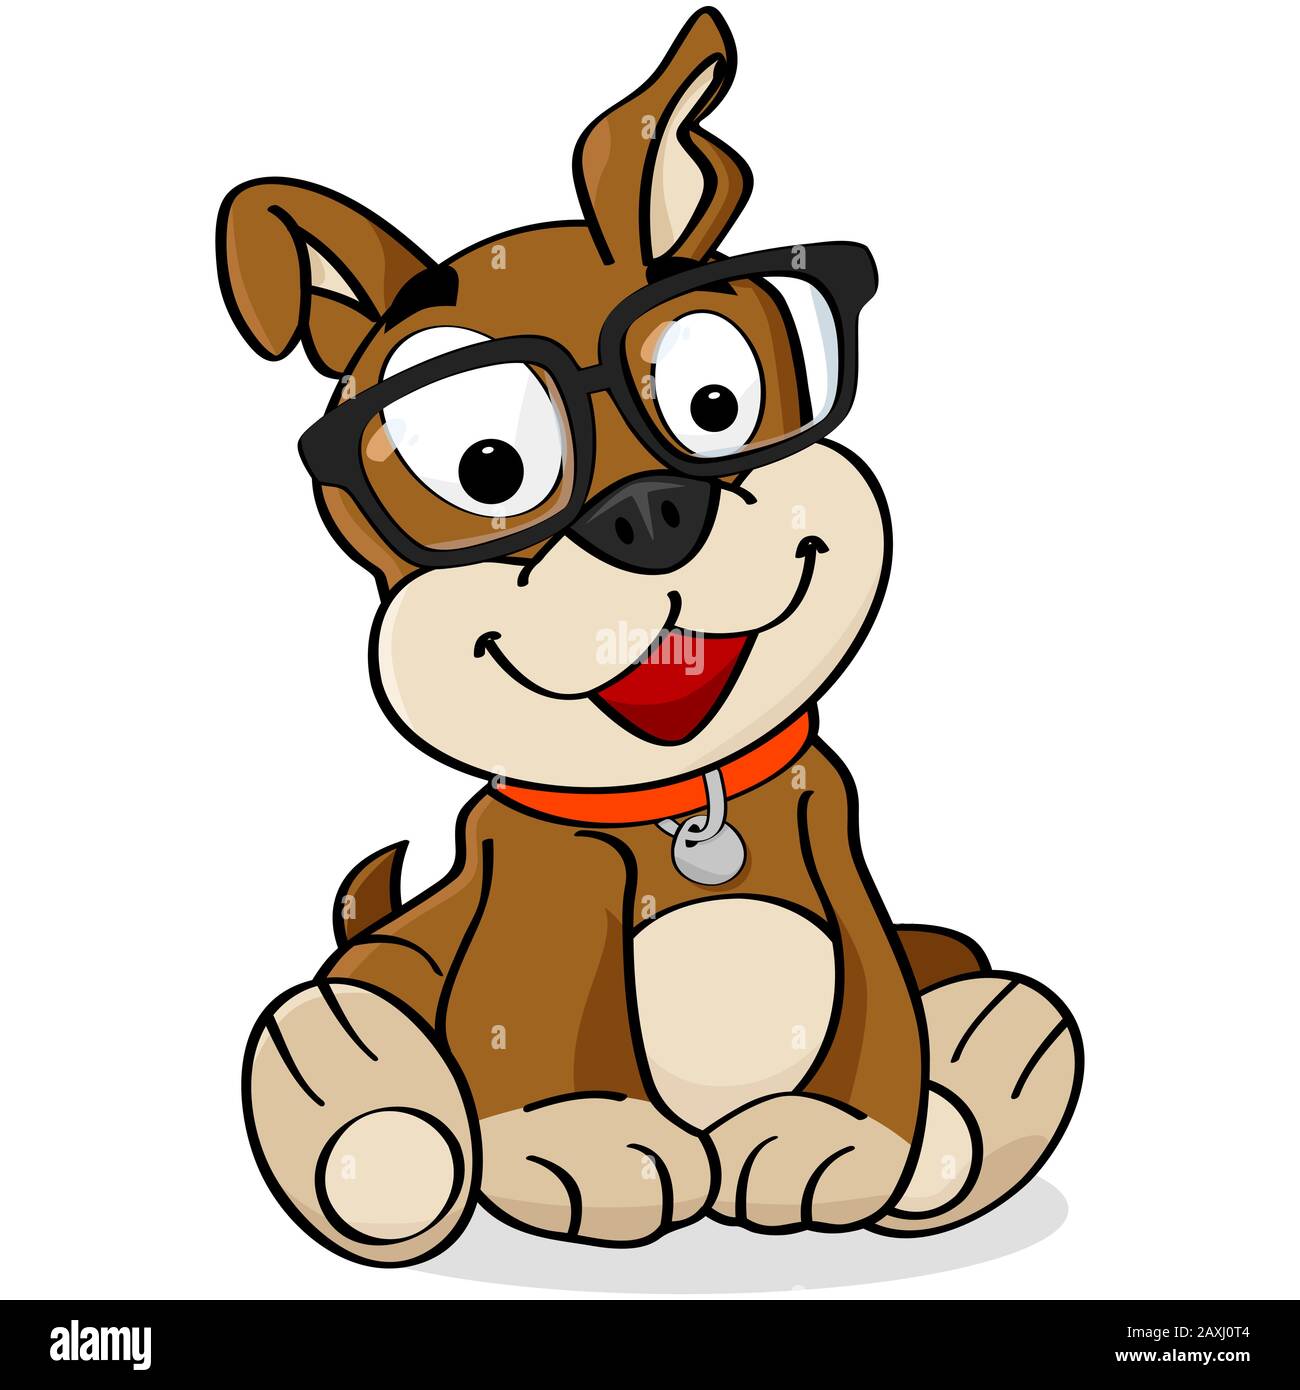 Concept cartoon illustration showing a nerd dog using glasses Stock Vector